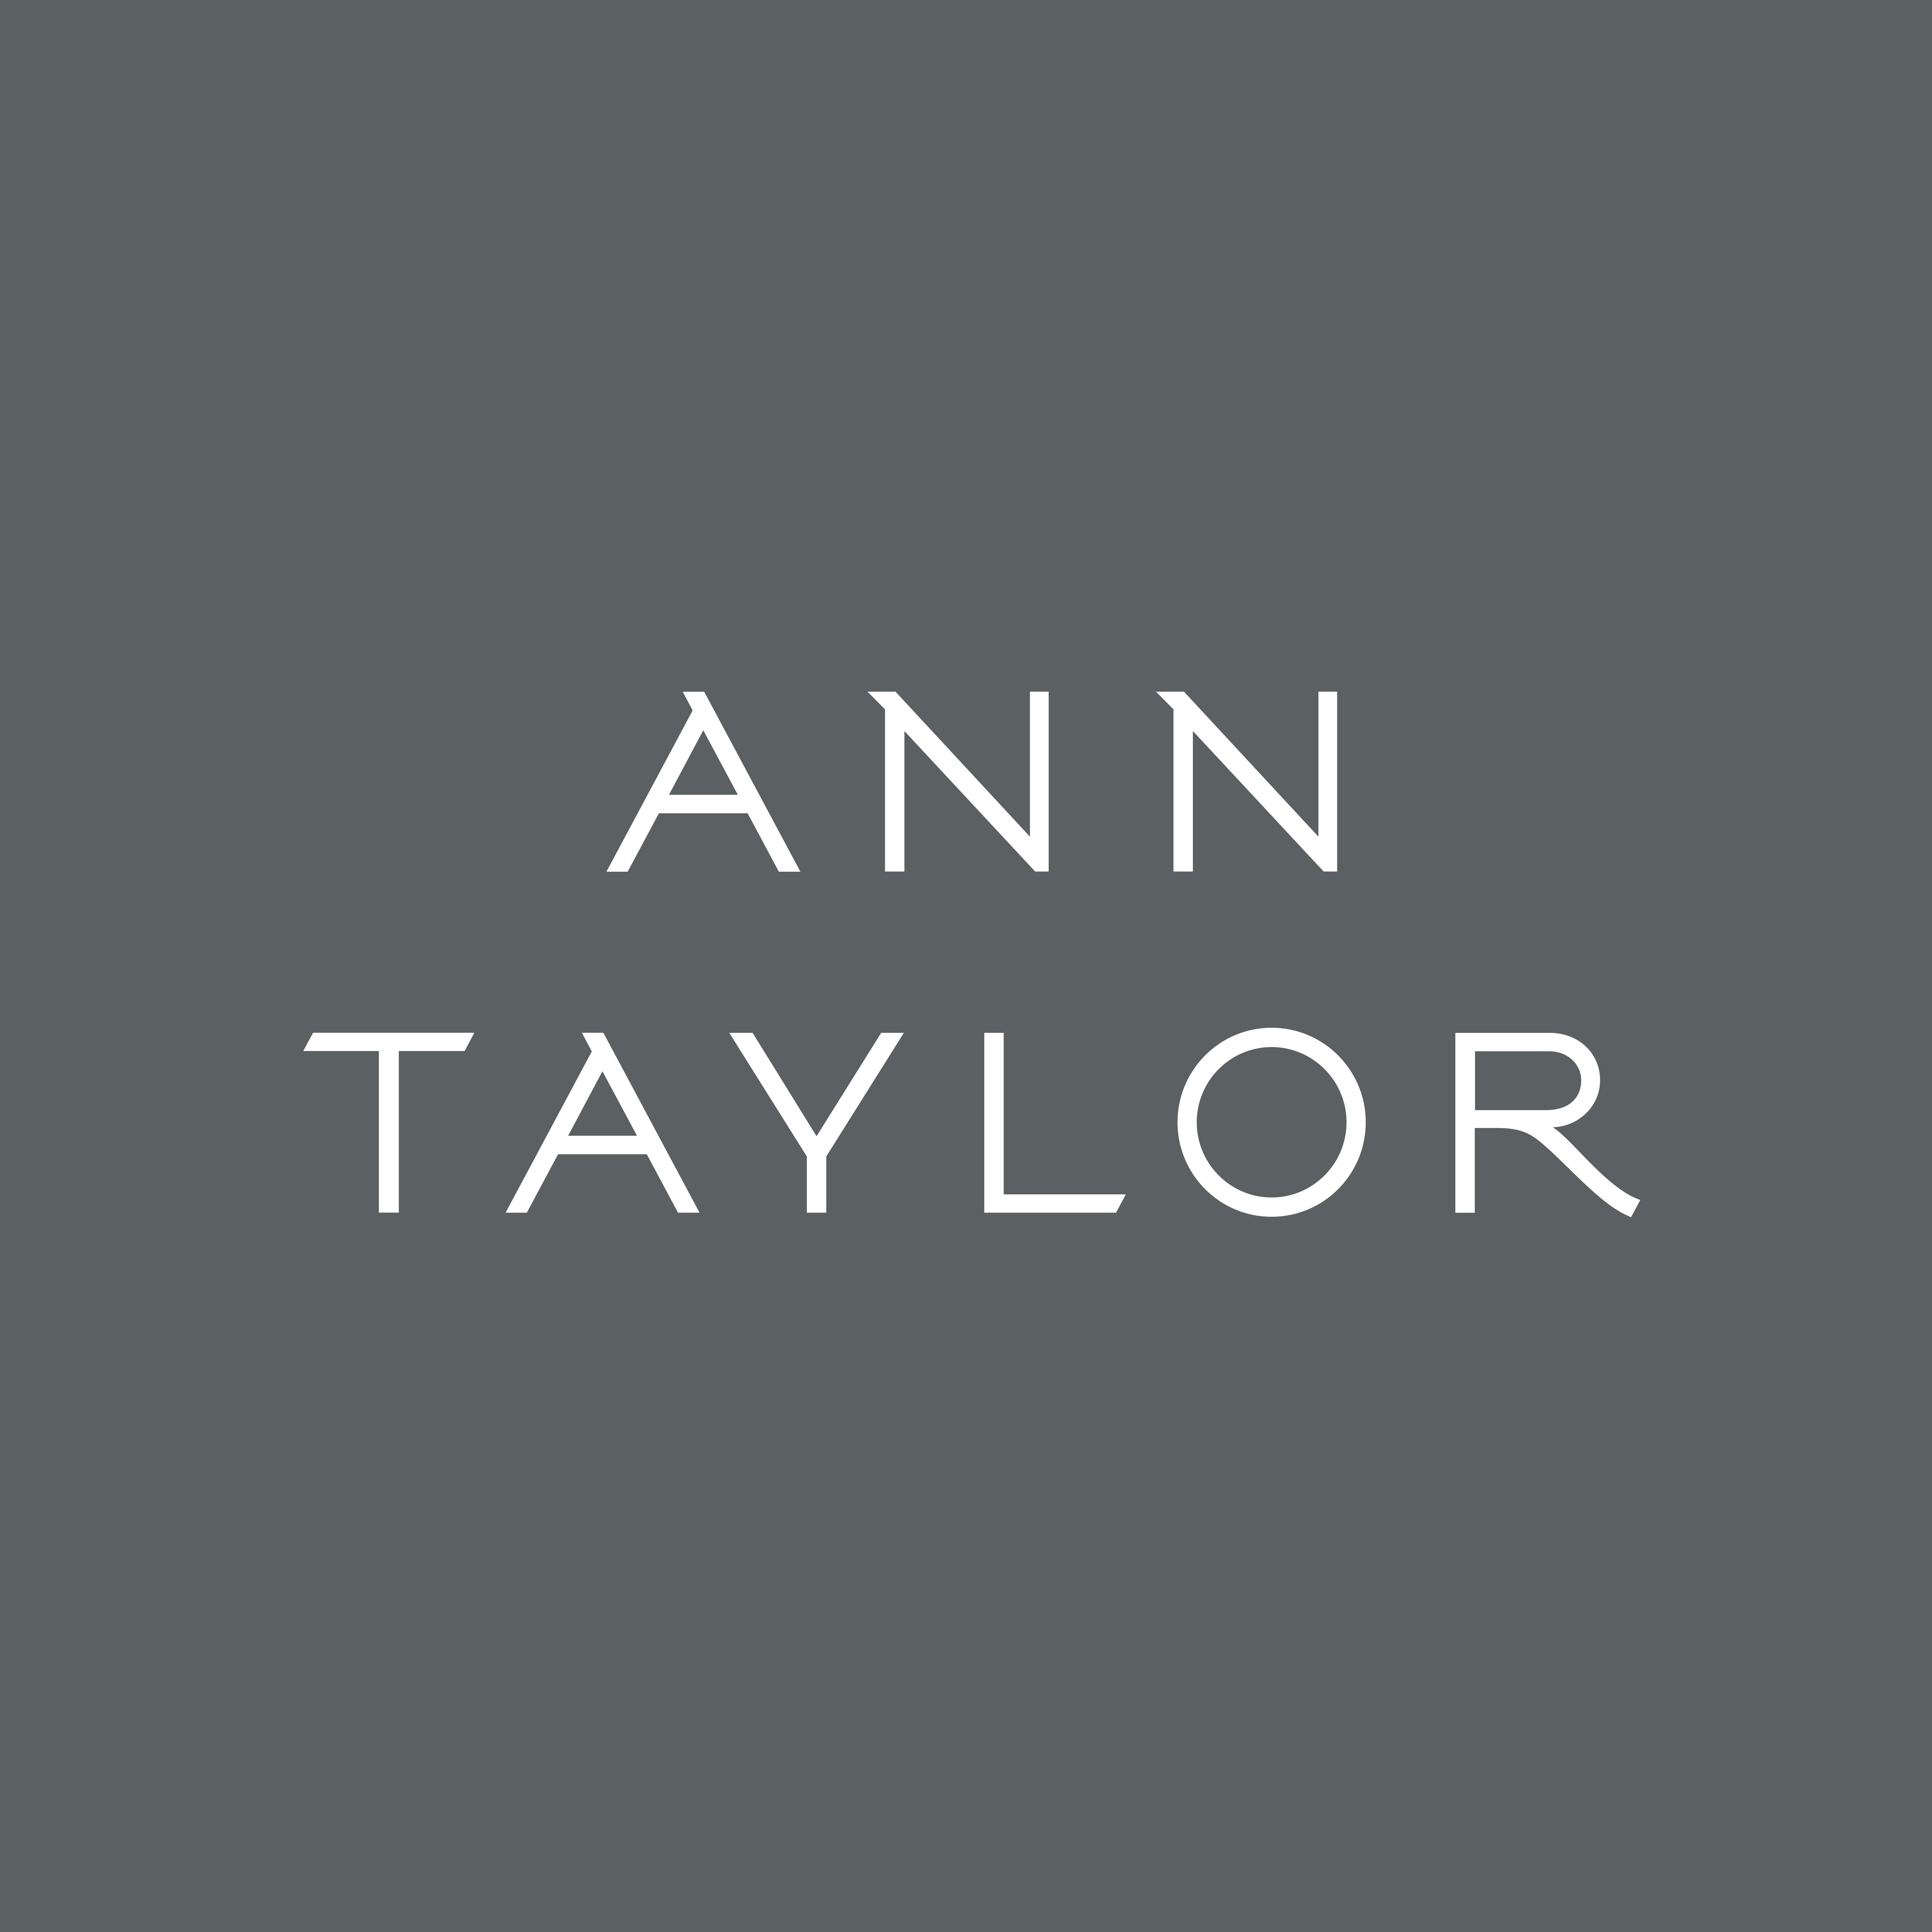 Ann Taylor Mall At Green Hills Women S Clothing Suits Dresses Cashmere Sweaters Petites In Nashville Tn [ 5000 x 5000 Pixel ]